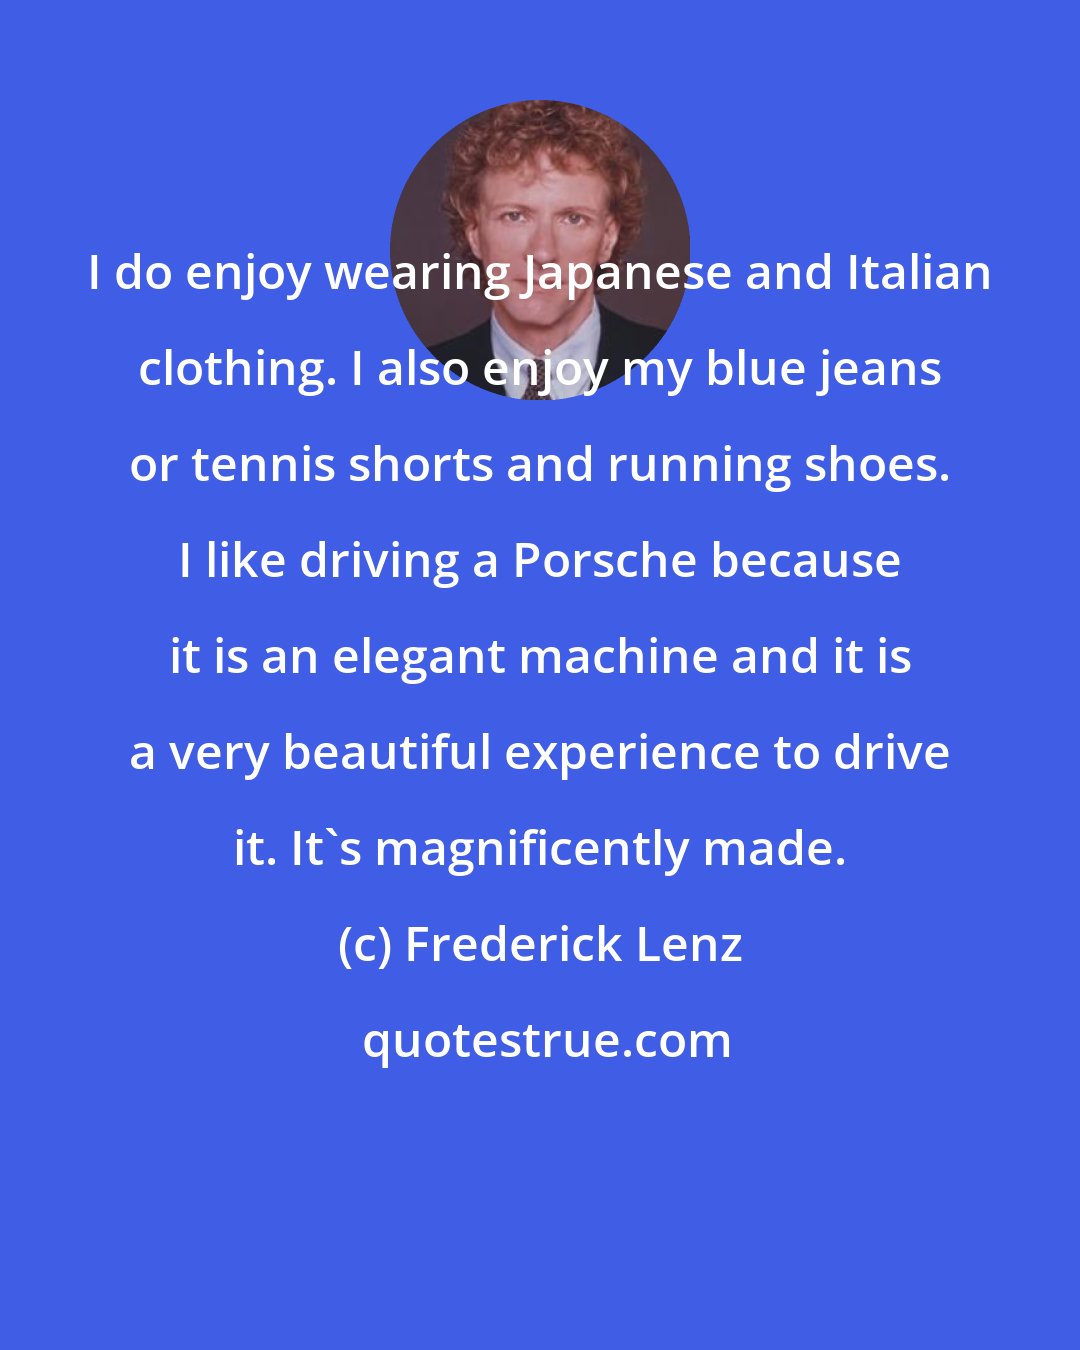 Frederick Lenz: I do enjoy wearing Japanese and Italian clothing. I also enjoy my blue jeans or tennis shorts and running shoes. I like driving a Porsche because it is an elegant machine and it is a very beautiful experience to drive it. It's magnificently made.